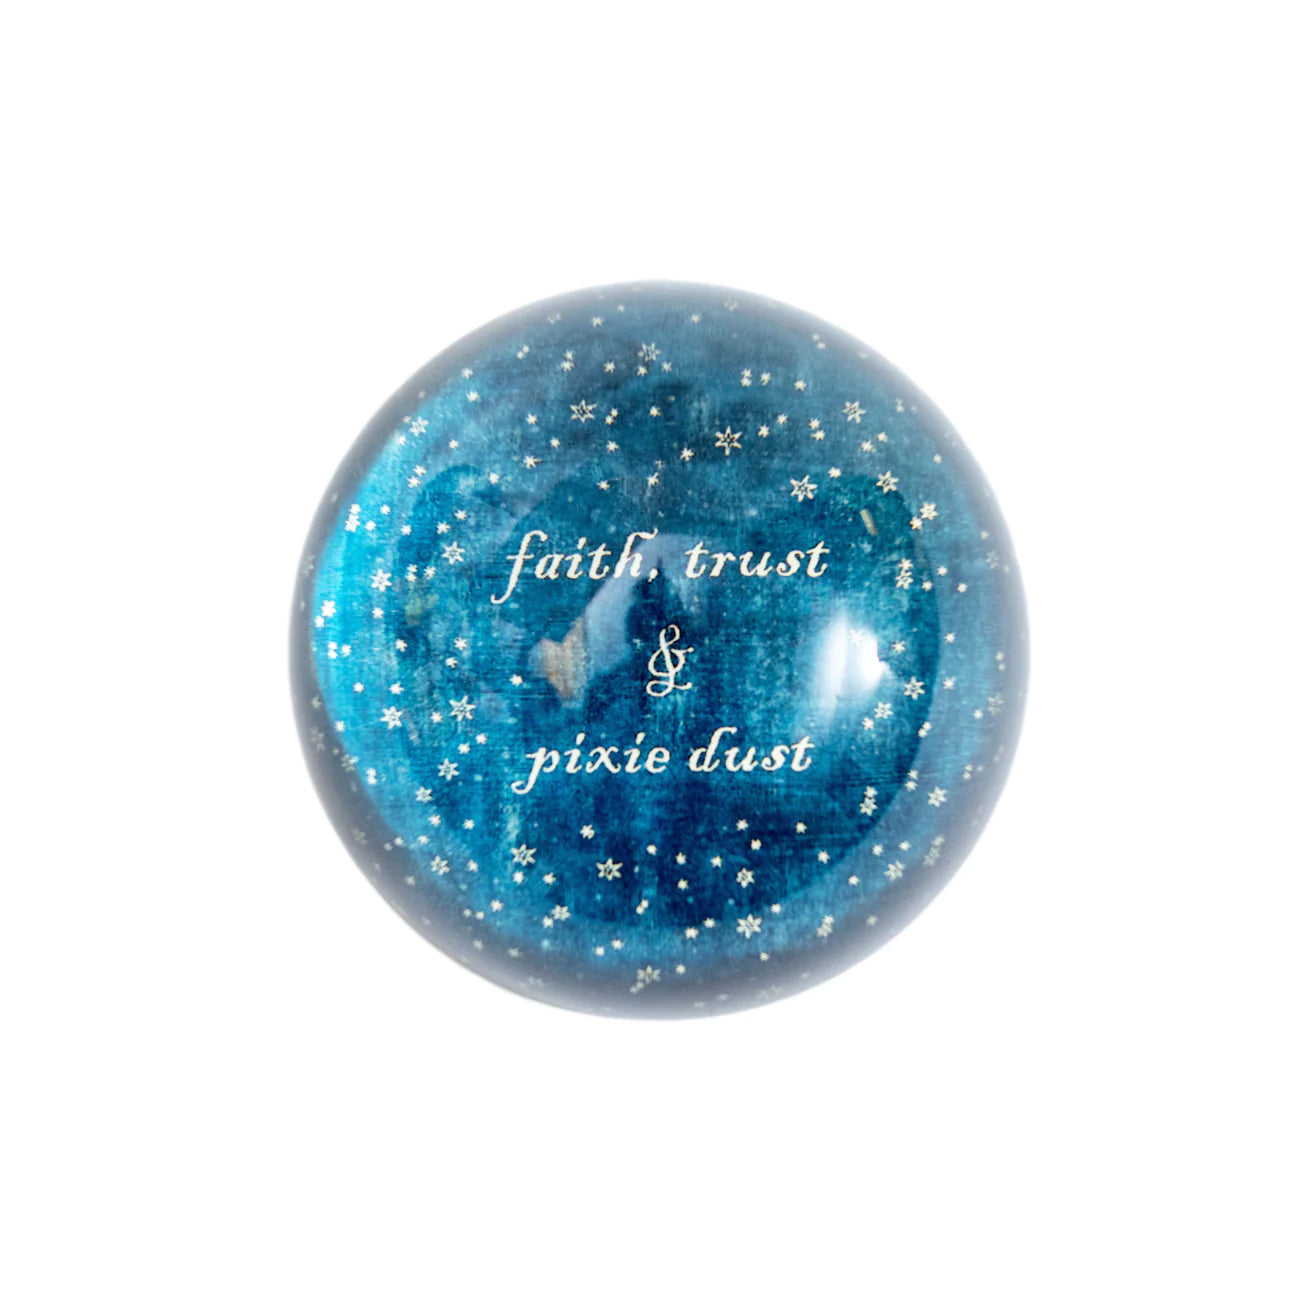 FATH TRUST PIXIE DUST PAPERWEIGHT